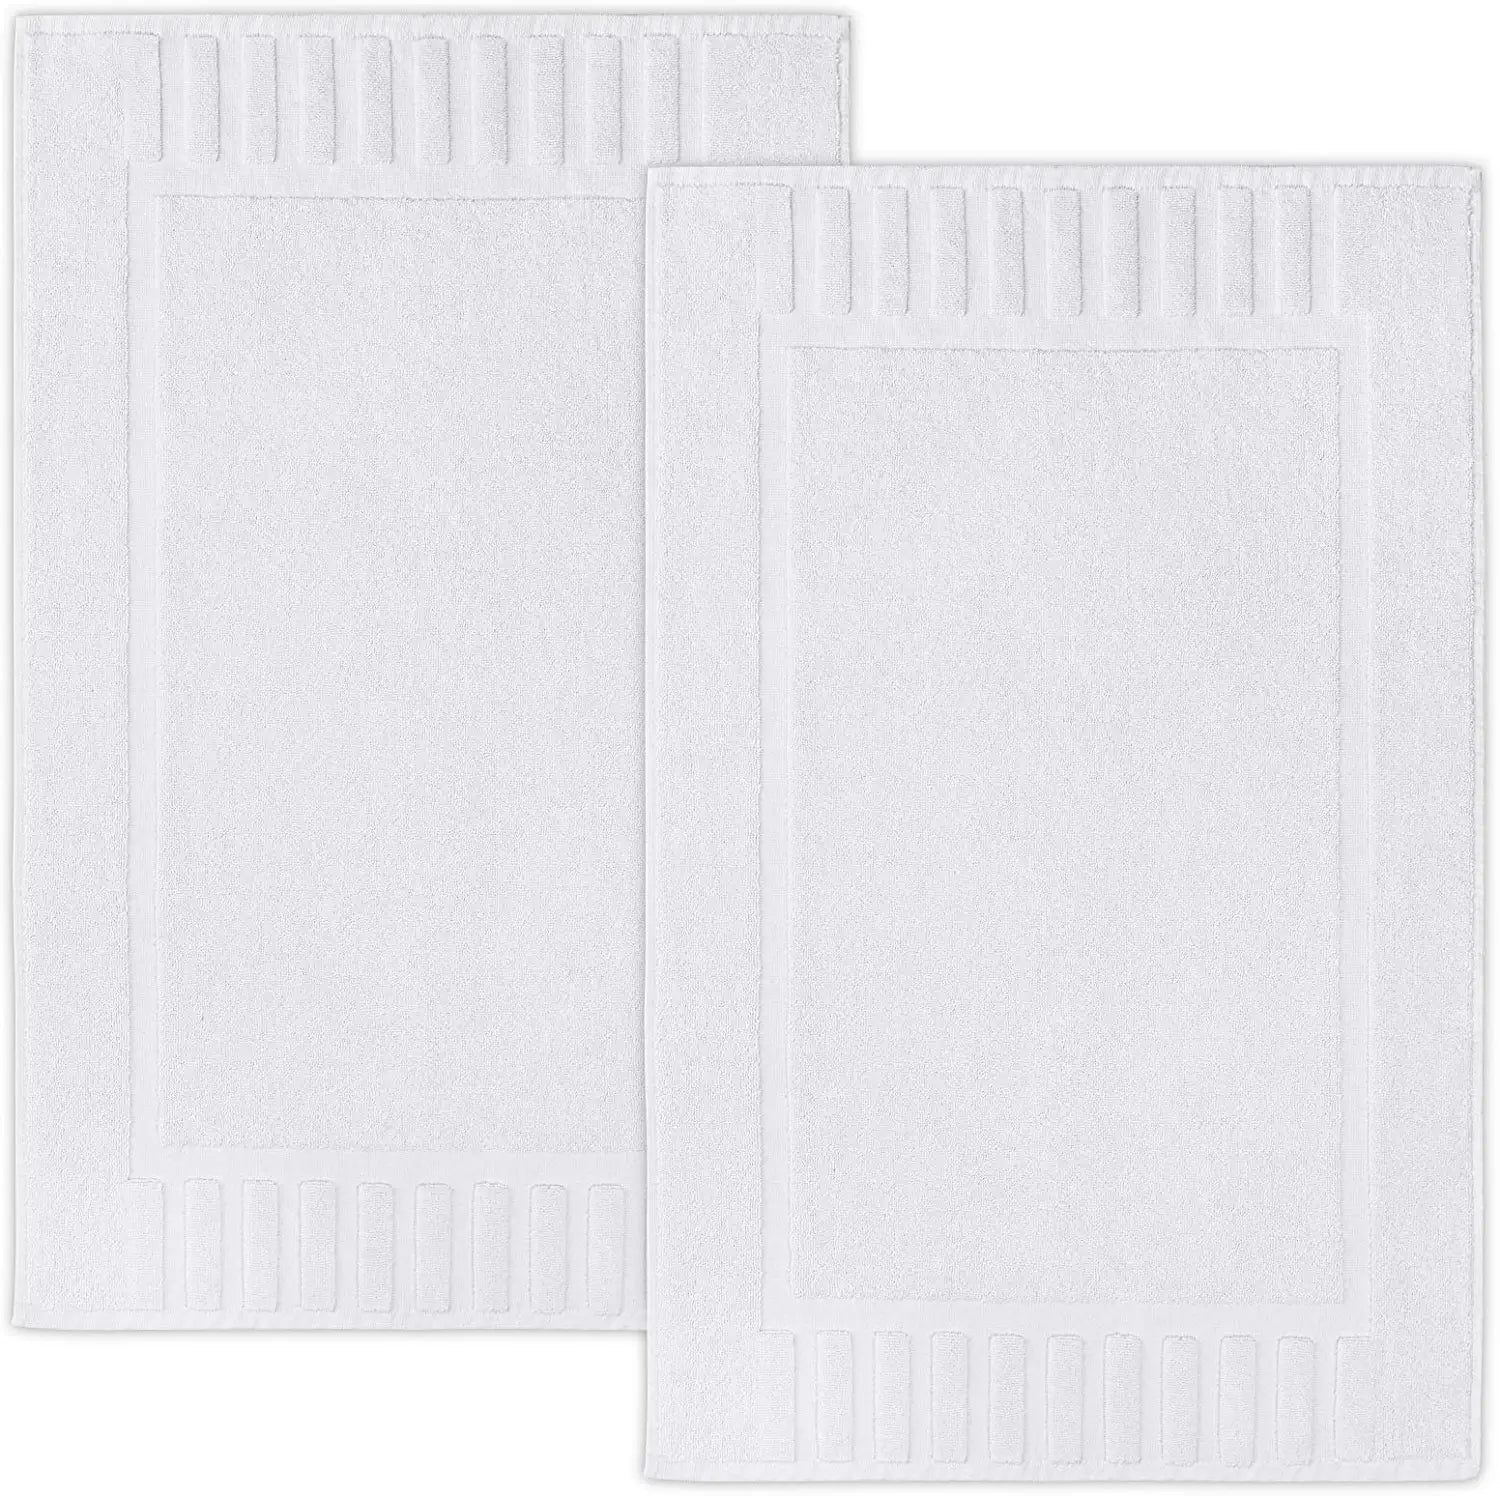 Hotel Collection White Bath mats